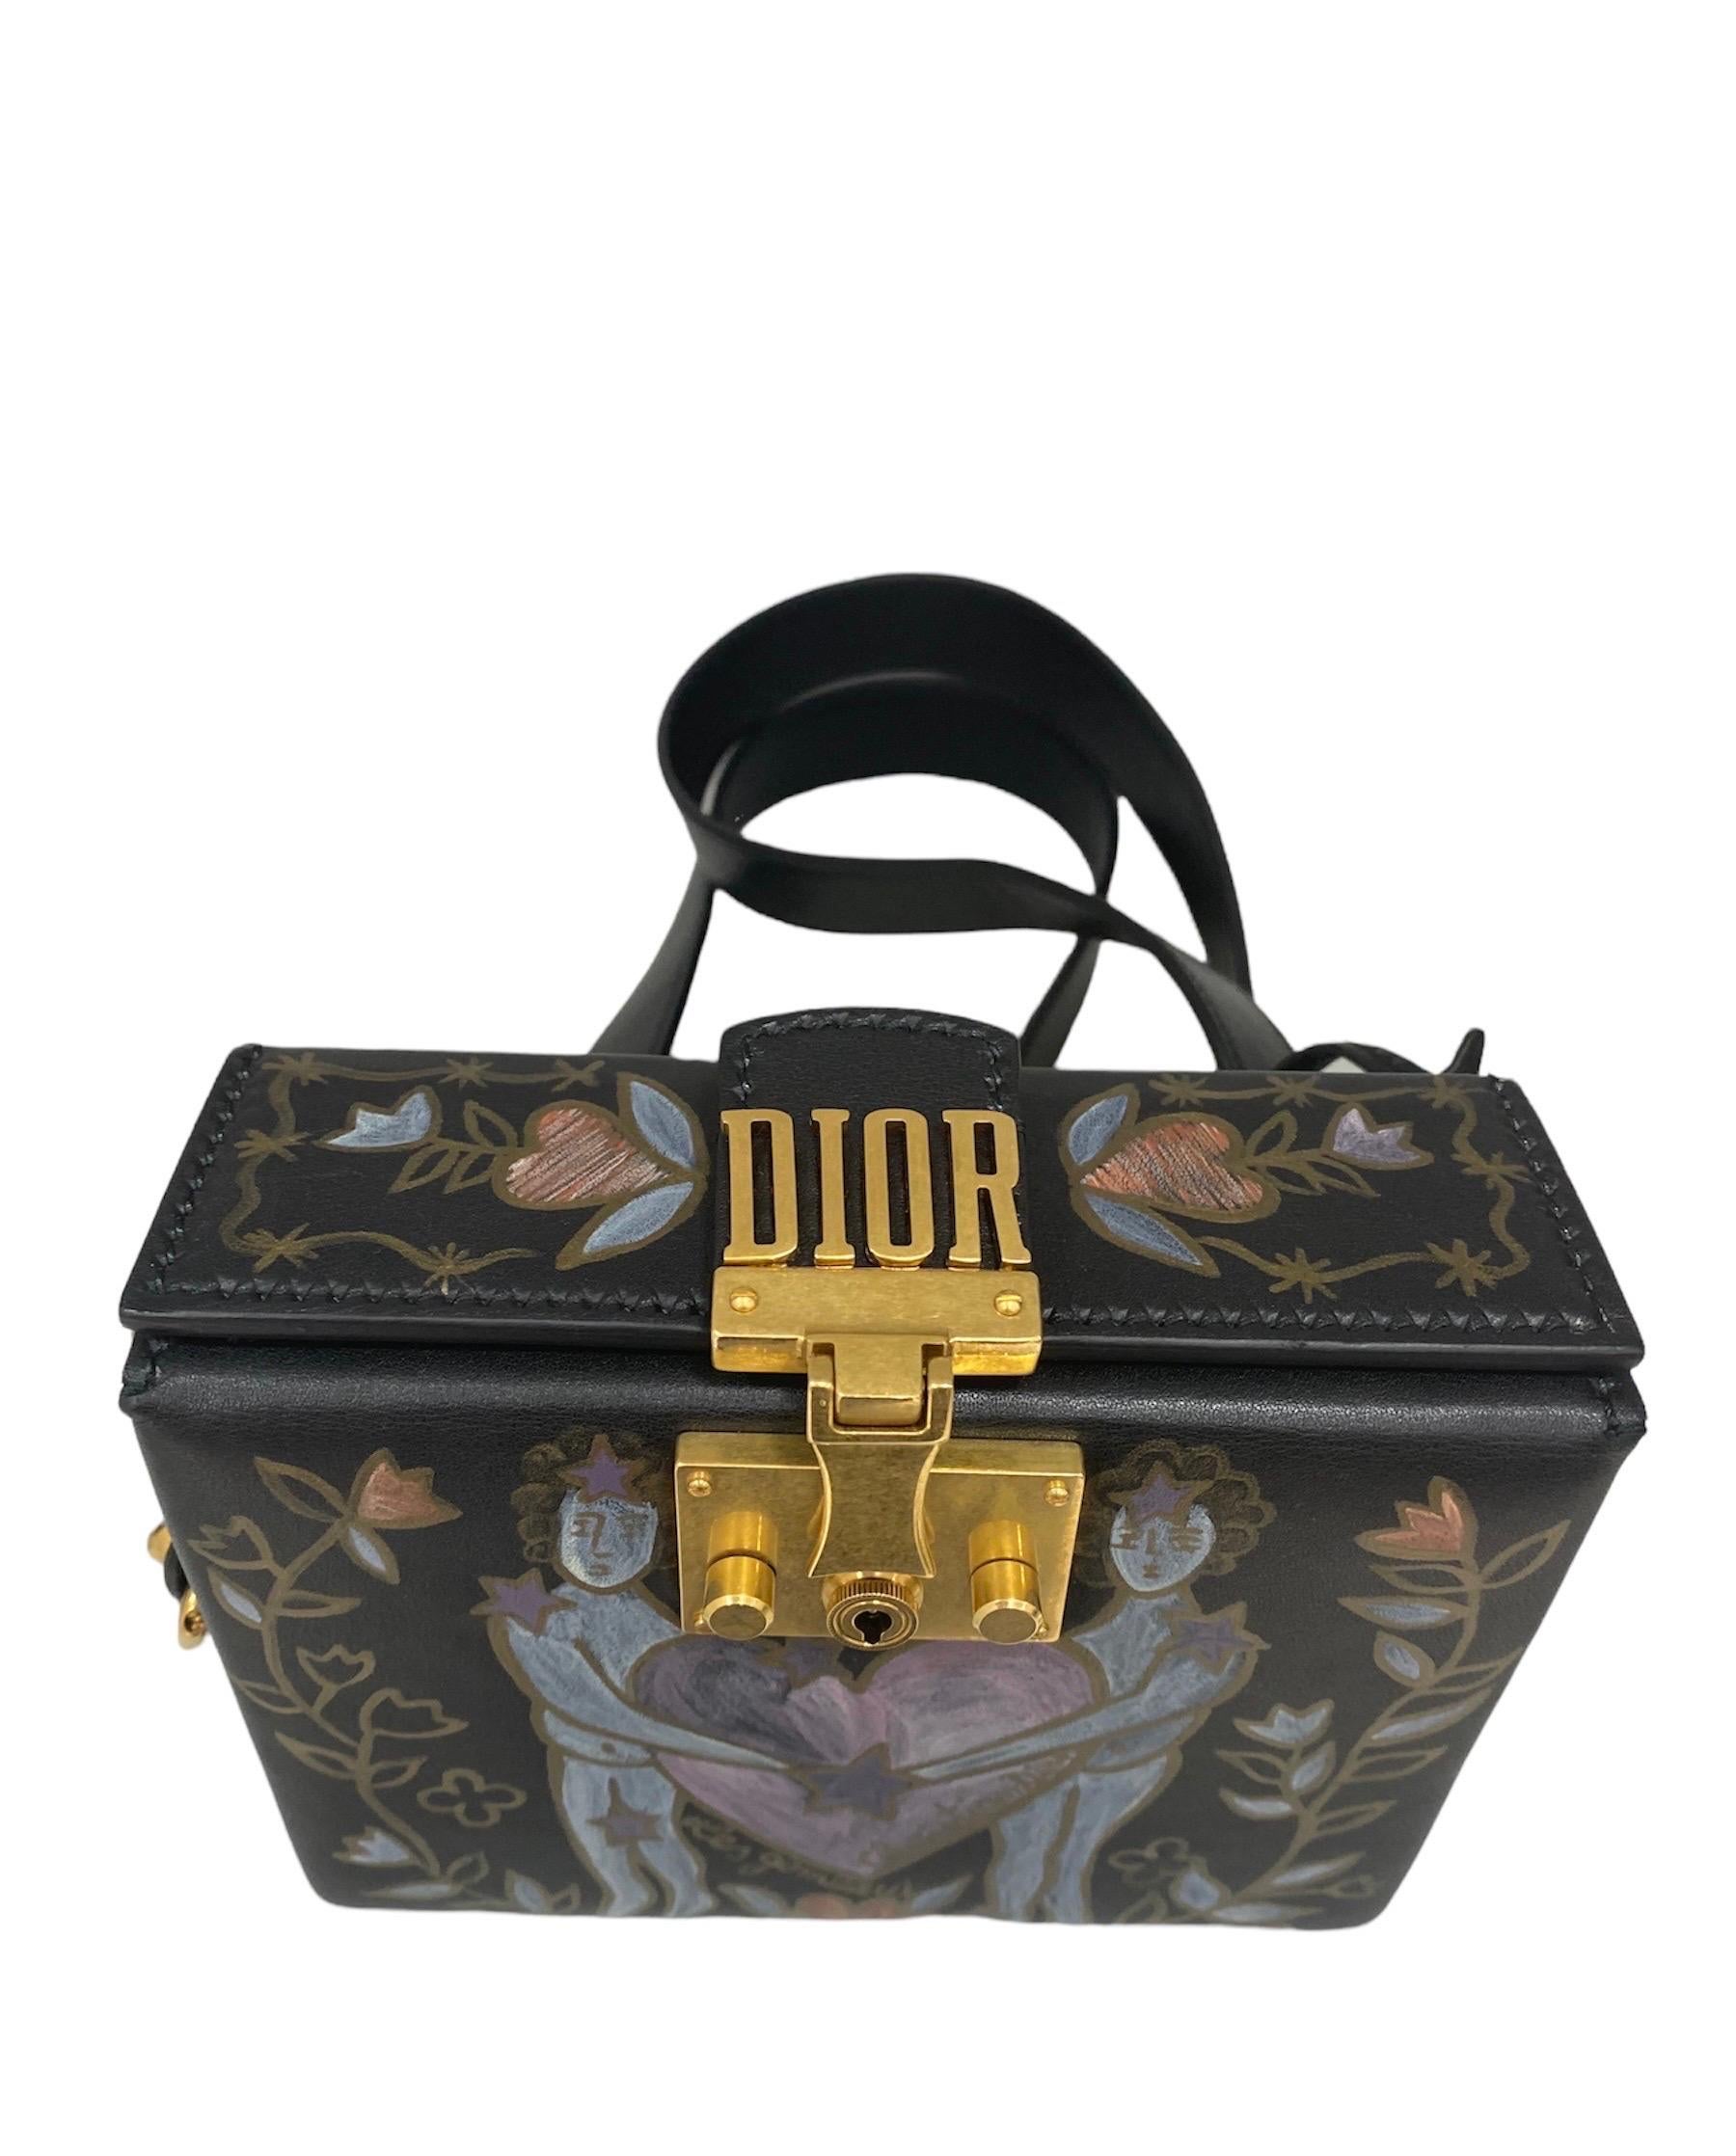 Bag signed Dior model LockBox made of smooth black leather with front painting depicting the symbol of cufflinks and gold hardware.

Equipped with a removable black leather shoulder strap. Equipped with an interlocking closure with writing preceding